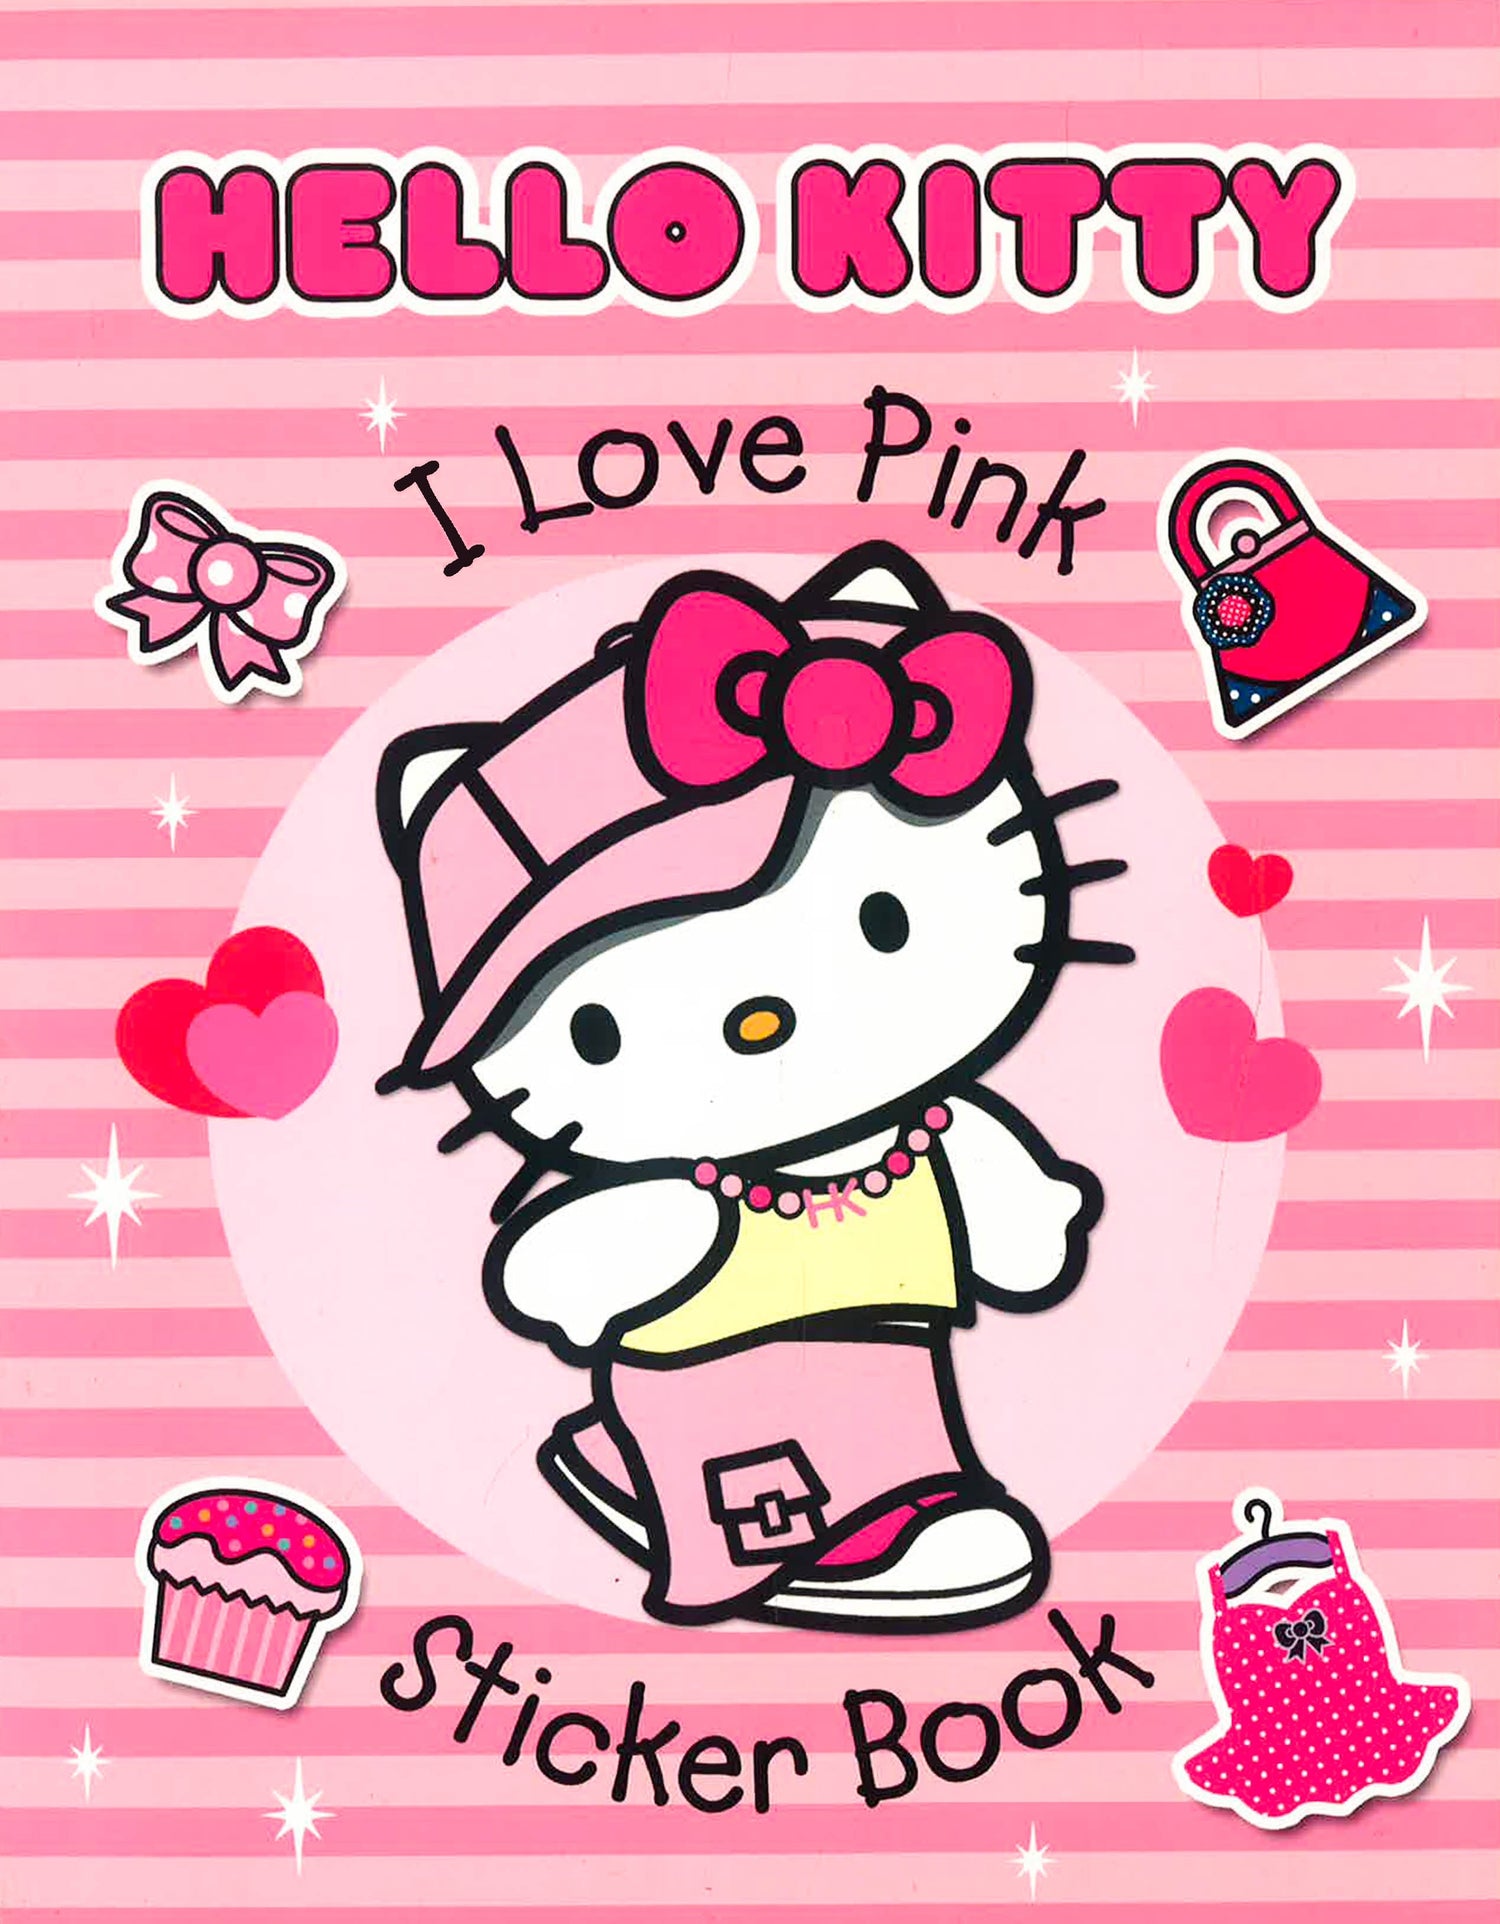 pain, love and hello kitty - image #8686641 on